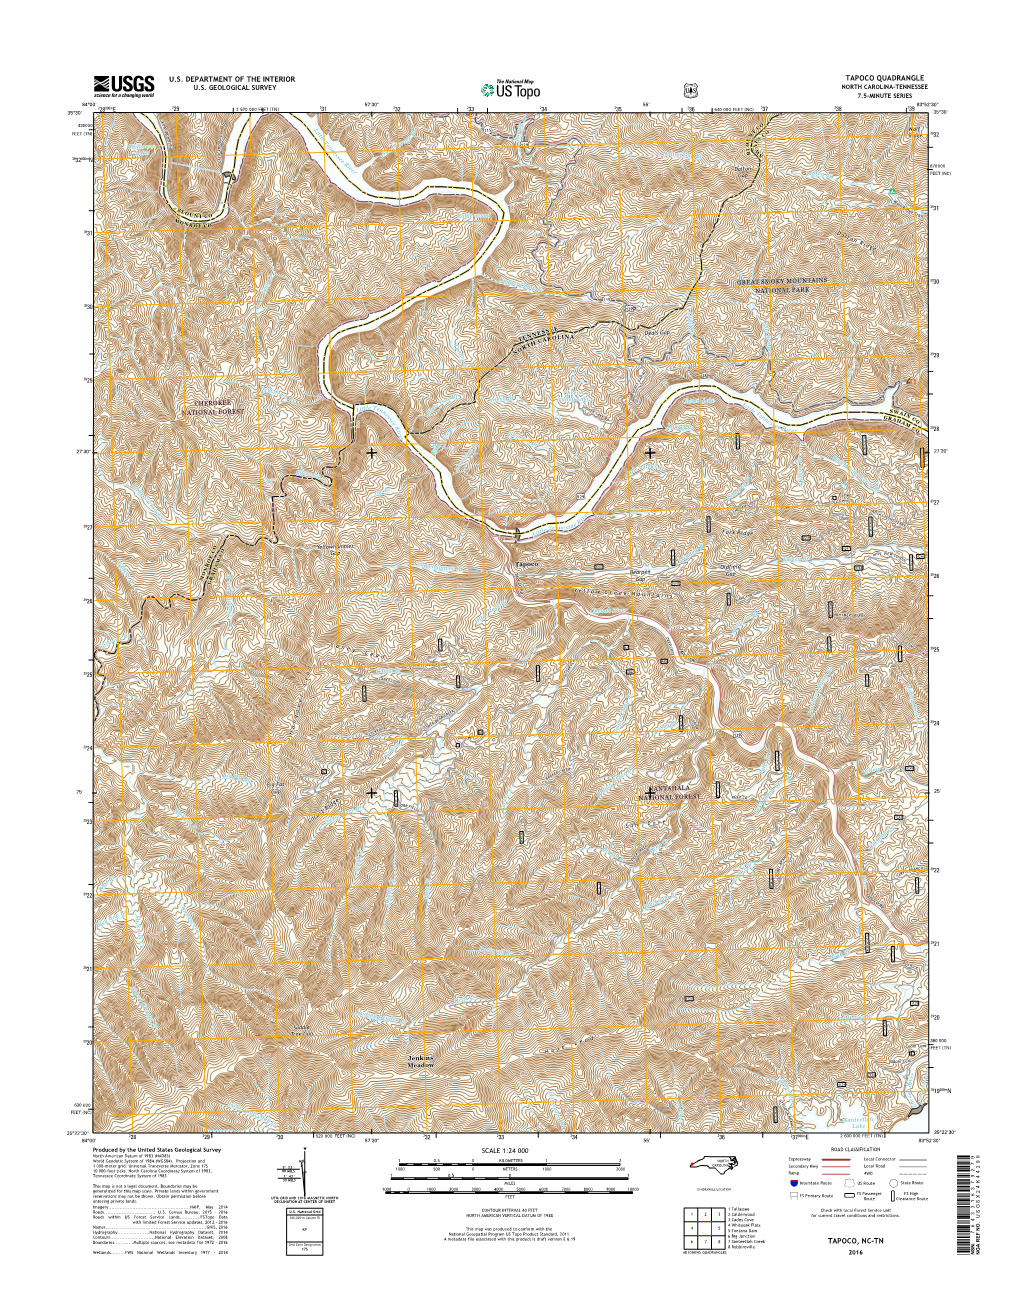 USGS 7.5-Minute Image Map for Tapoco, North Carolina